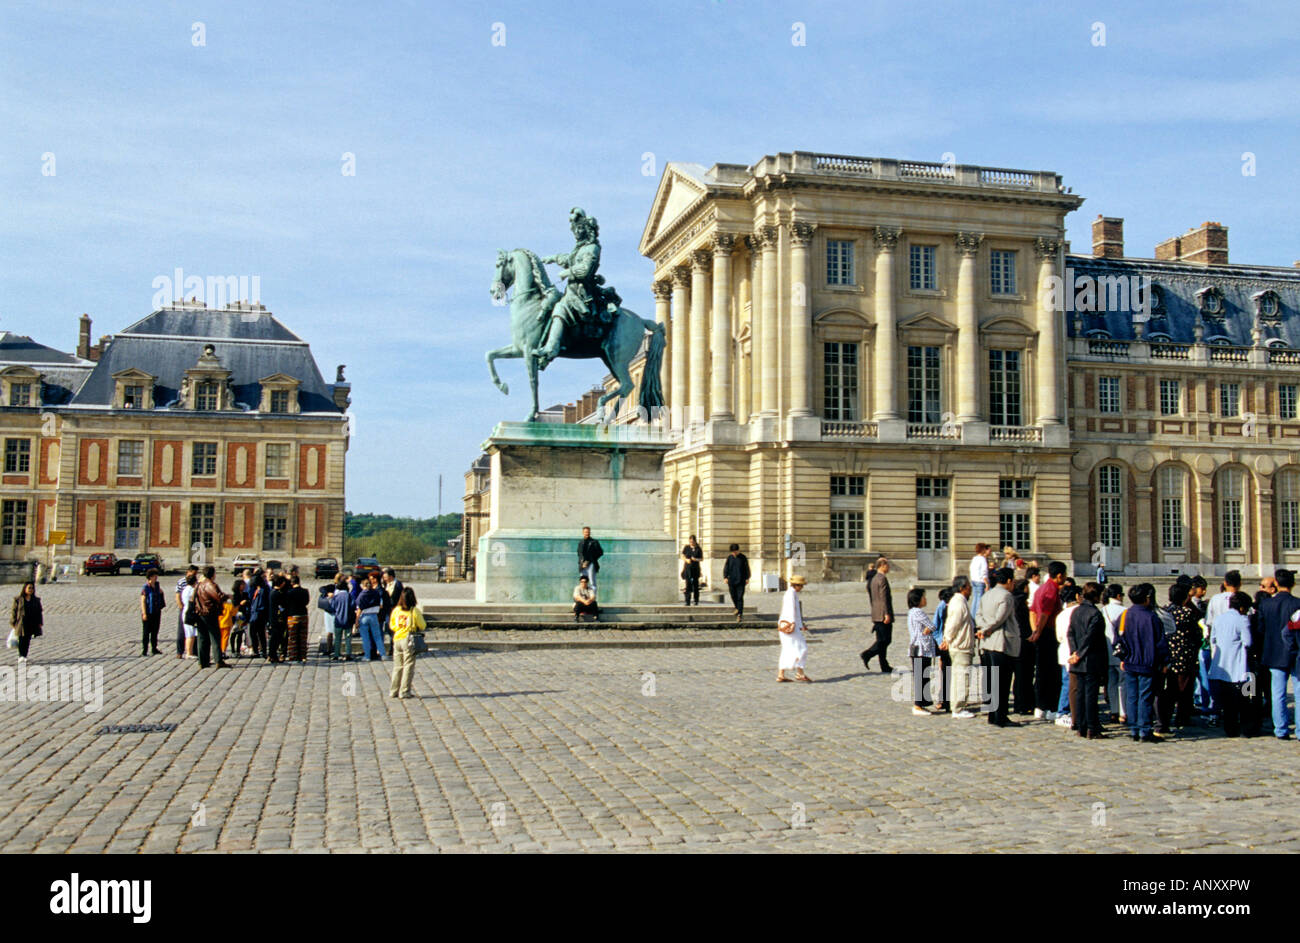 Statue of Louis XIV at the Palace of Versailles, Paris, France Stock Photo